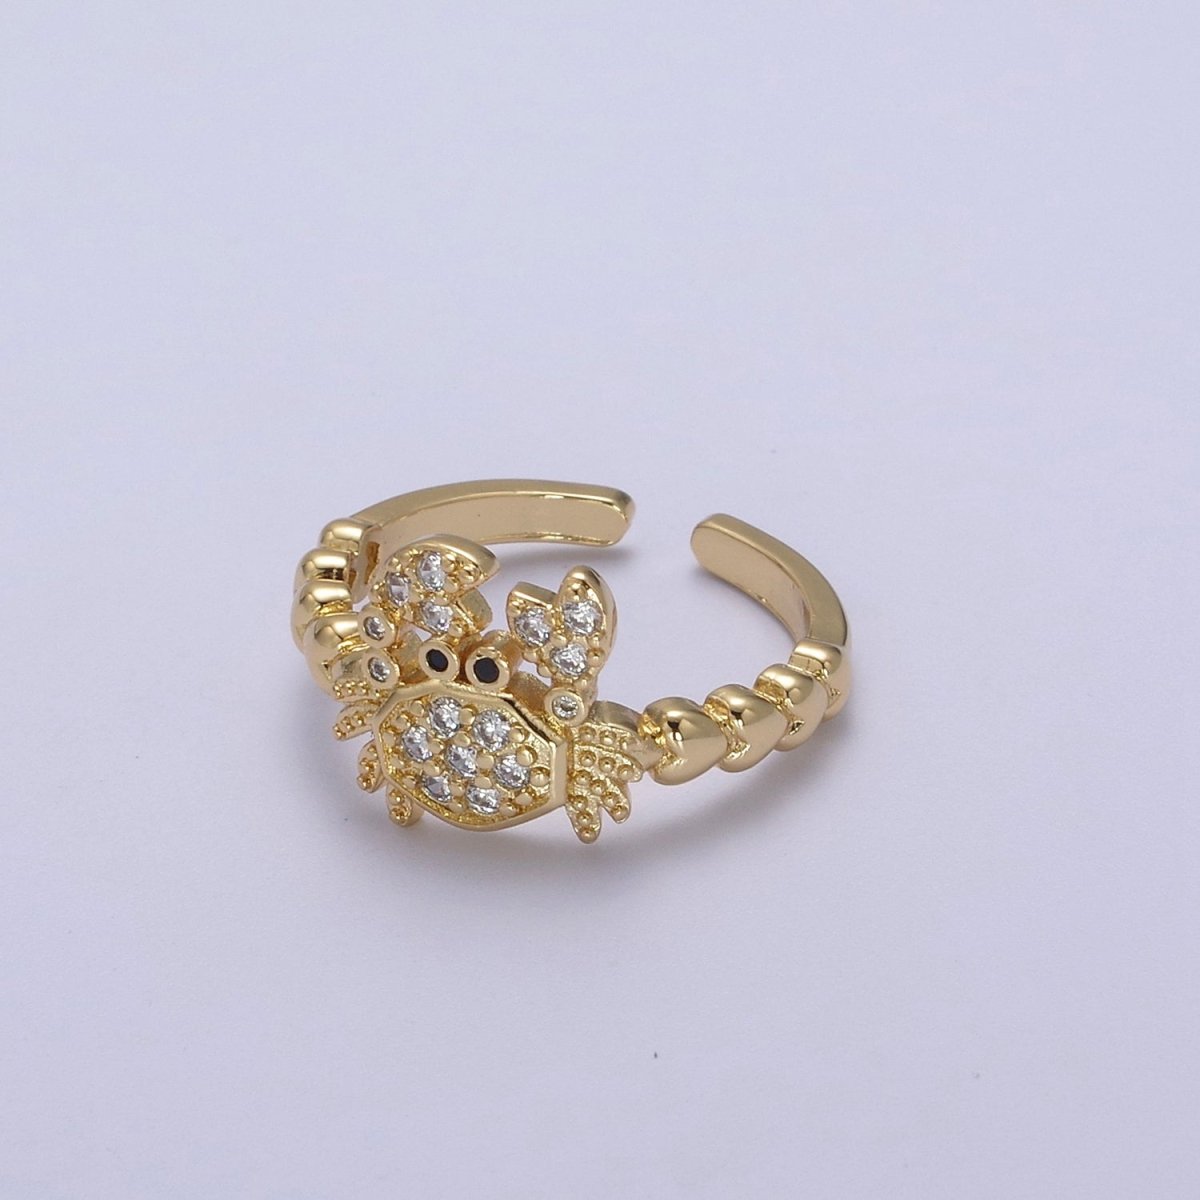 Micro Pave Cute Crab Ring, Heart Textured Gold Adjustable Band Ring, 24K Gold Filled Nature Ocean Wildlife Under The Sea Ring U-440 - DLUXCA